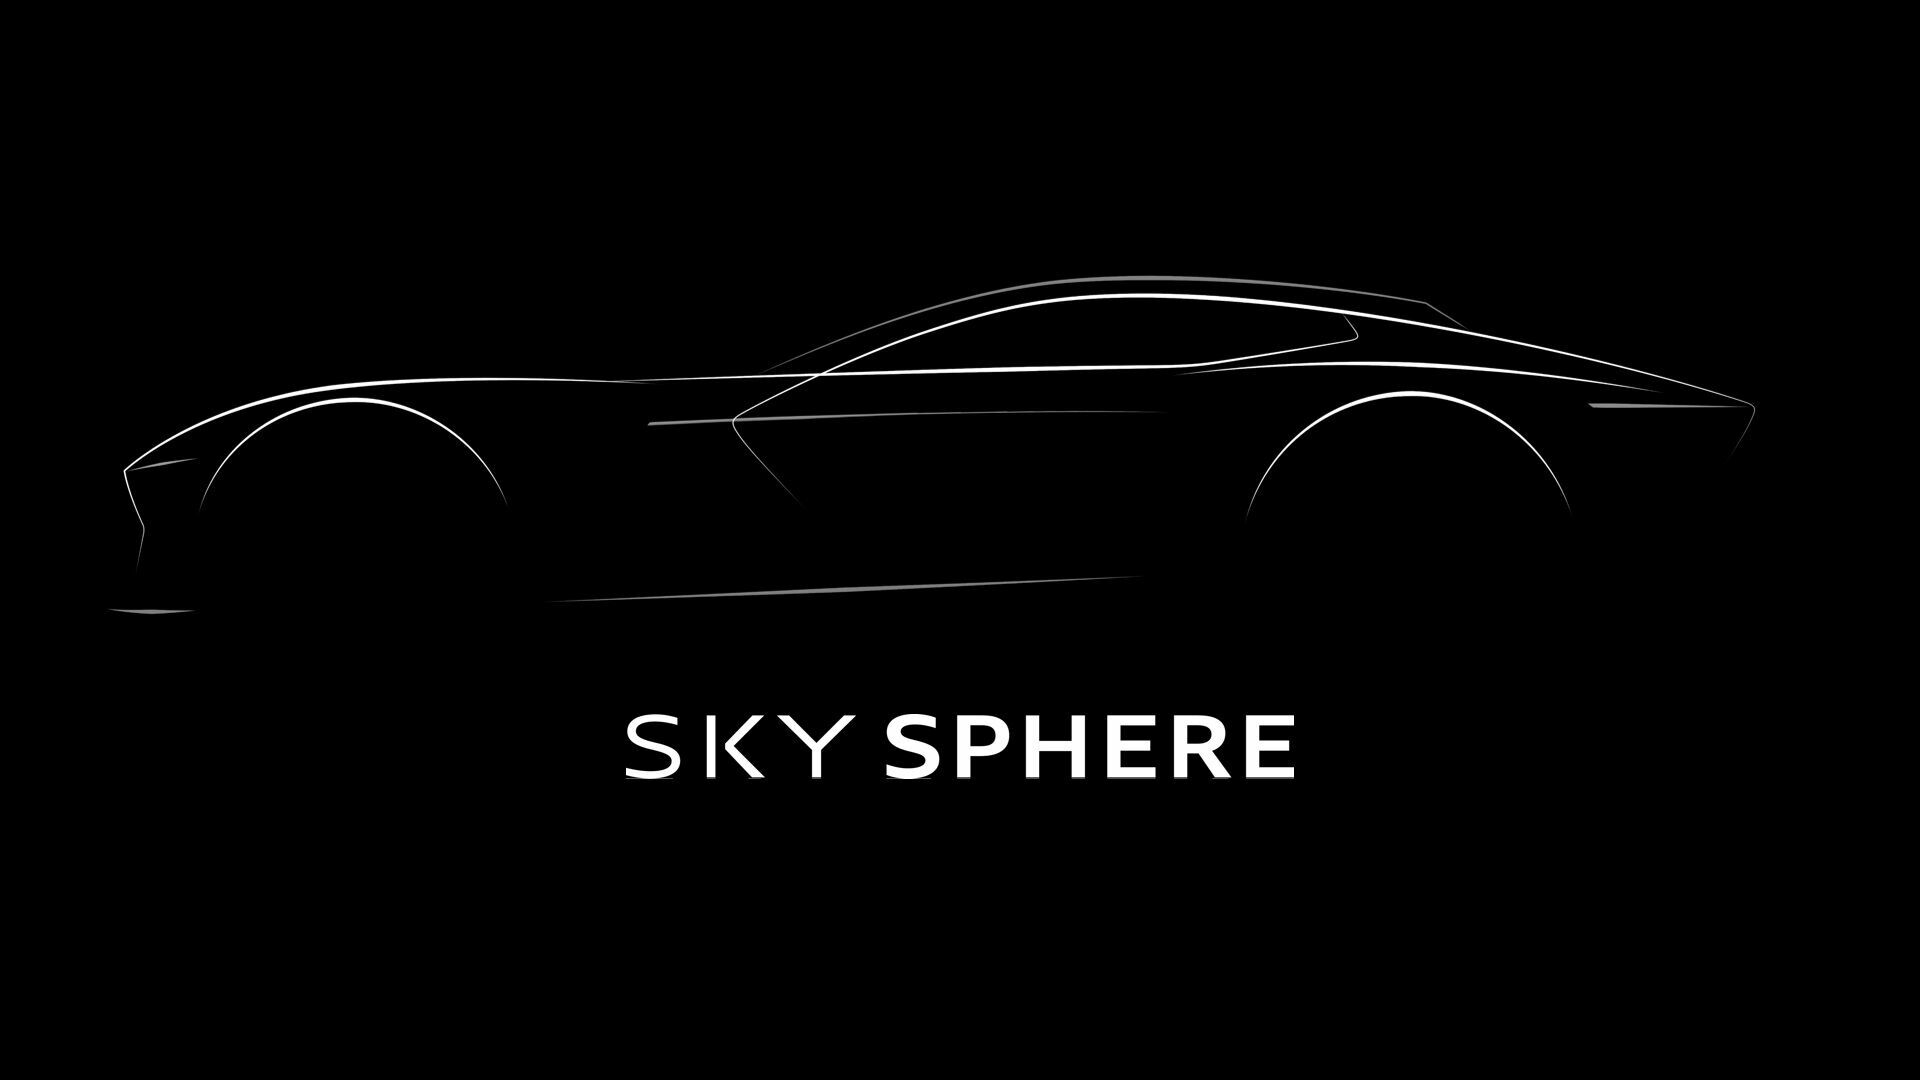 Save the date: the online world premiere of the Audi skysphere concept